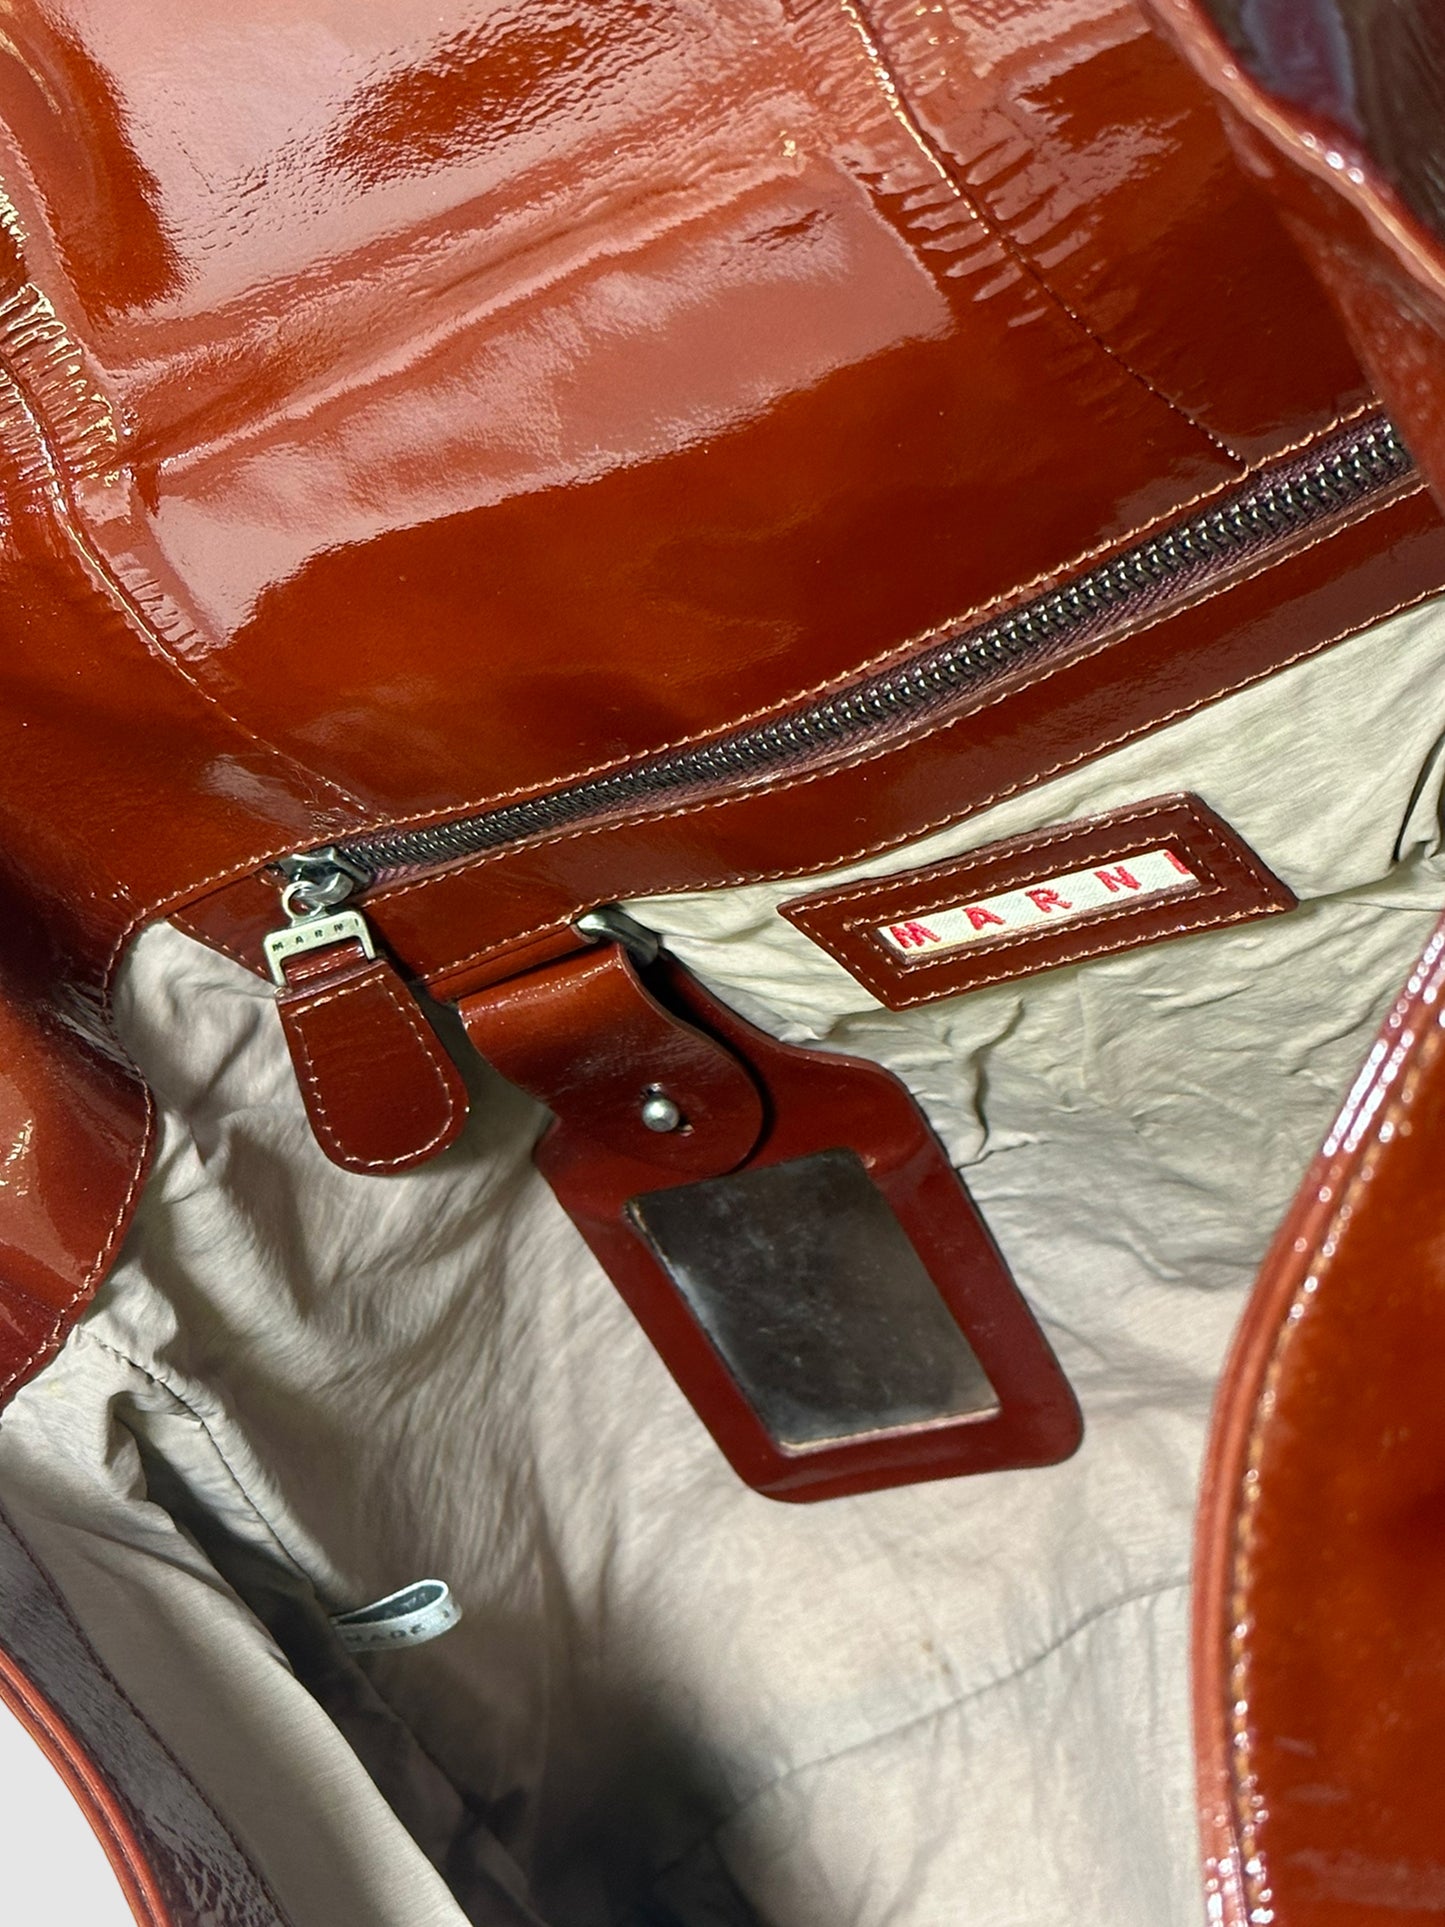 Patent Leather Handle Bag